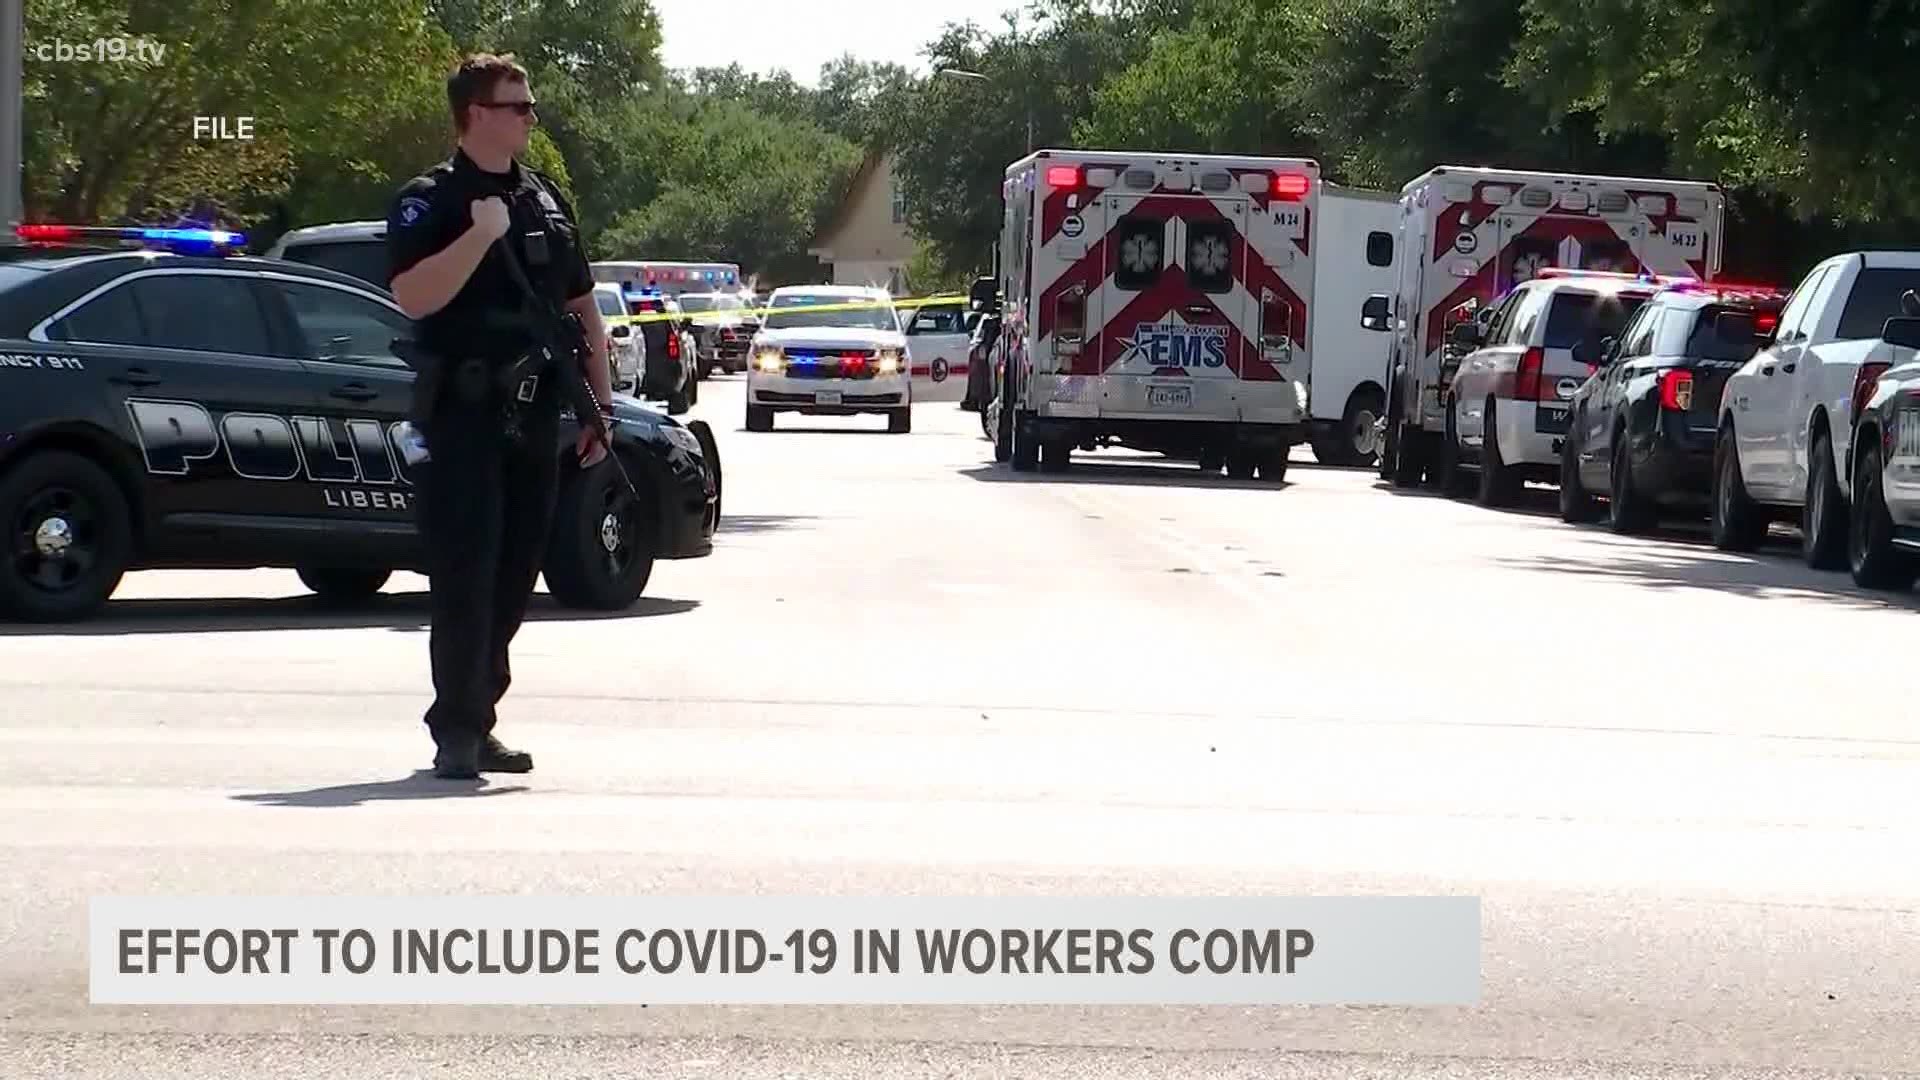 Texas is one of 20 states that has not attempted to act. A Texas law enforcement groups says COVID-19 should be a line-of-duty death, and families deserve benefits.